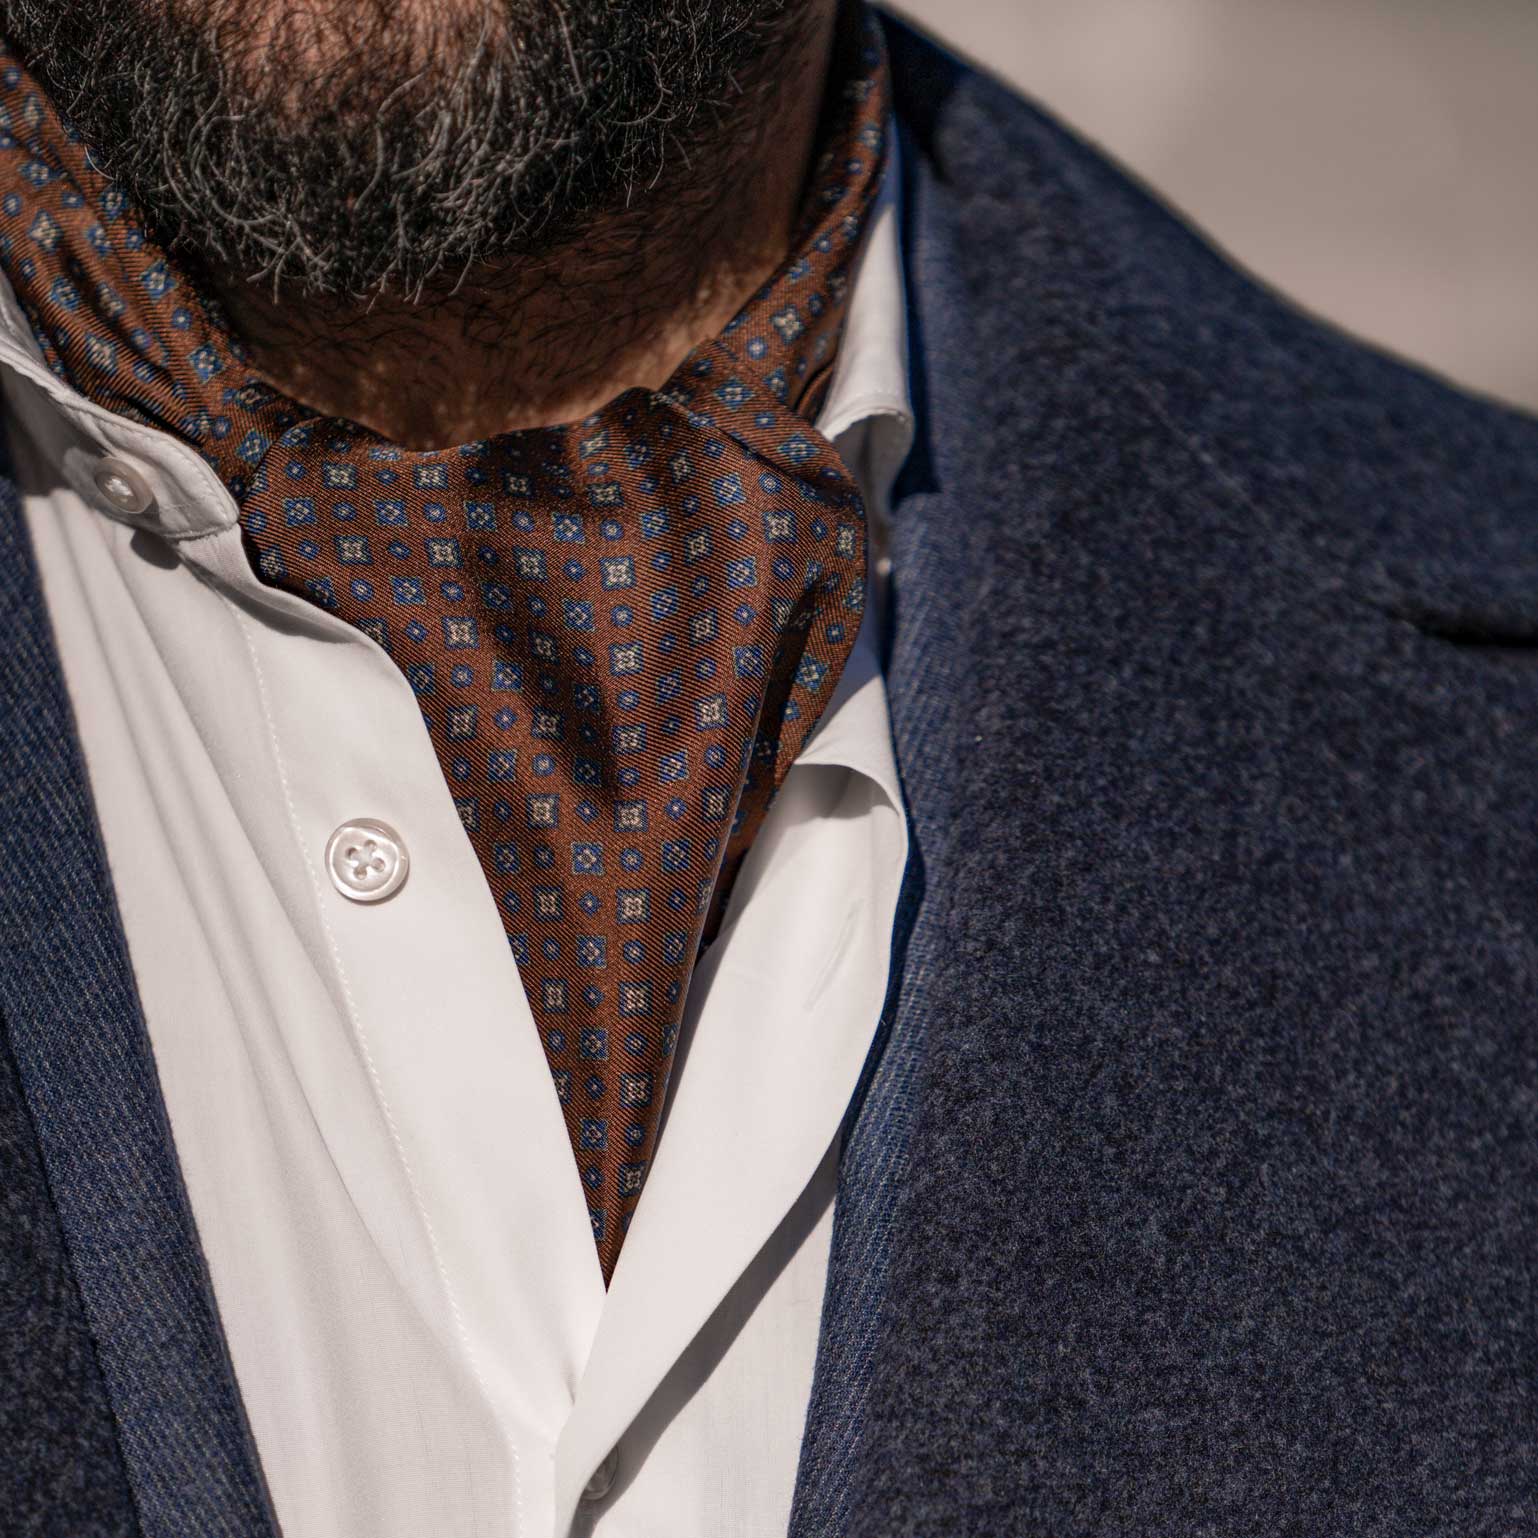 Ascot tie: how to wear it? - Fashion Details